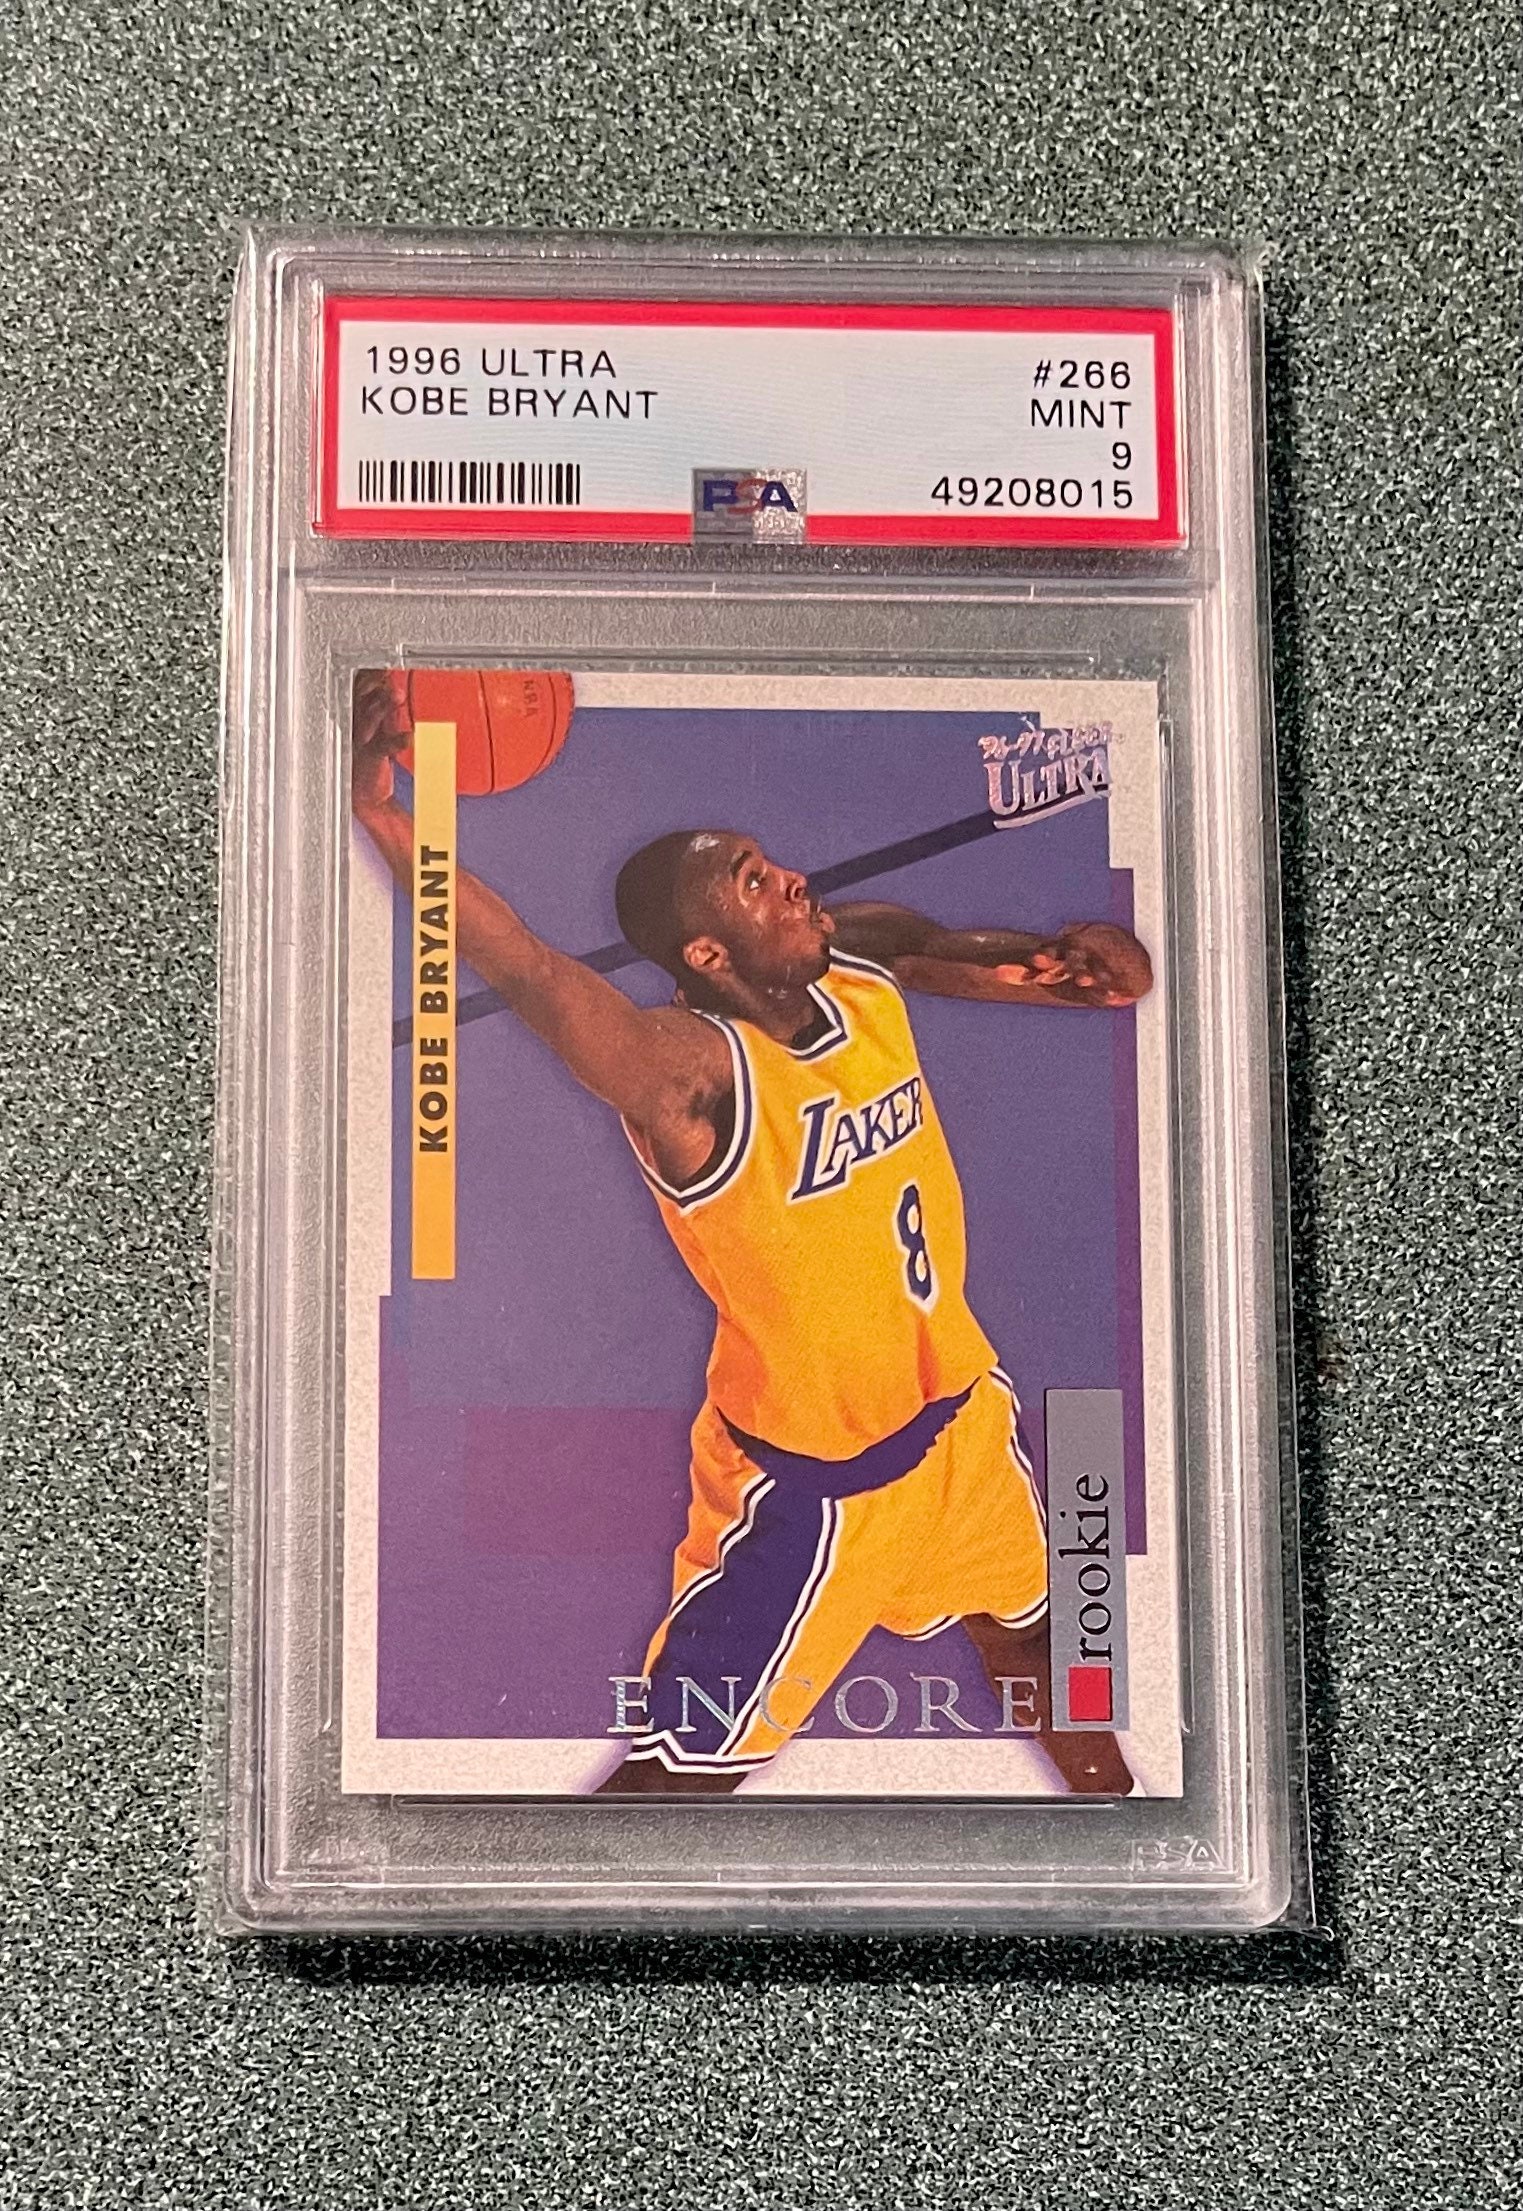 Kobe Bryant 1996 Scoreboard #15 HIGH SCHOOL Rookie Card in MINT Condition!  Shipped in Ultra Pro Top Loader to Protect it! at 's Sports  Collectibles Store